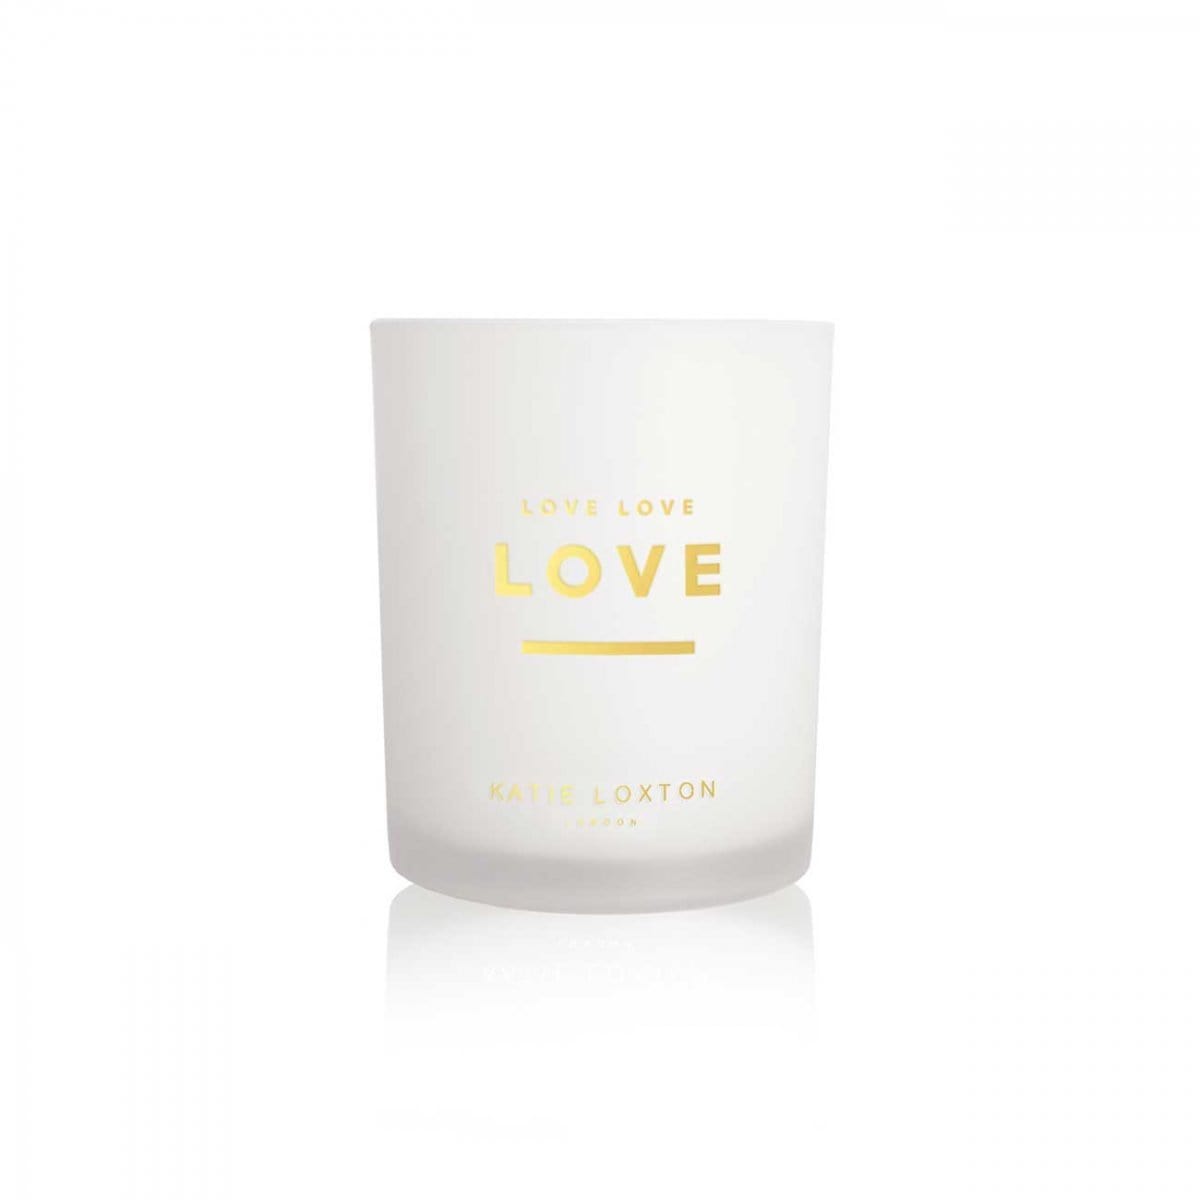 Katie Loxton Candle Katie Loxton Sentiment Candle - Love Love Love - Sweet Papaya and Hibiscus Flower